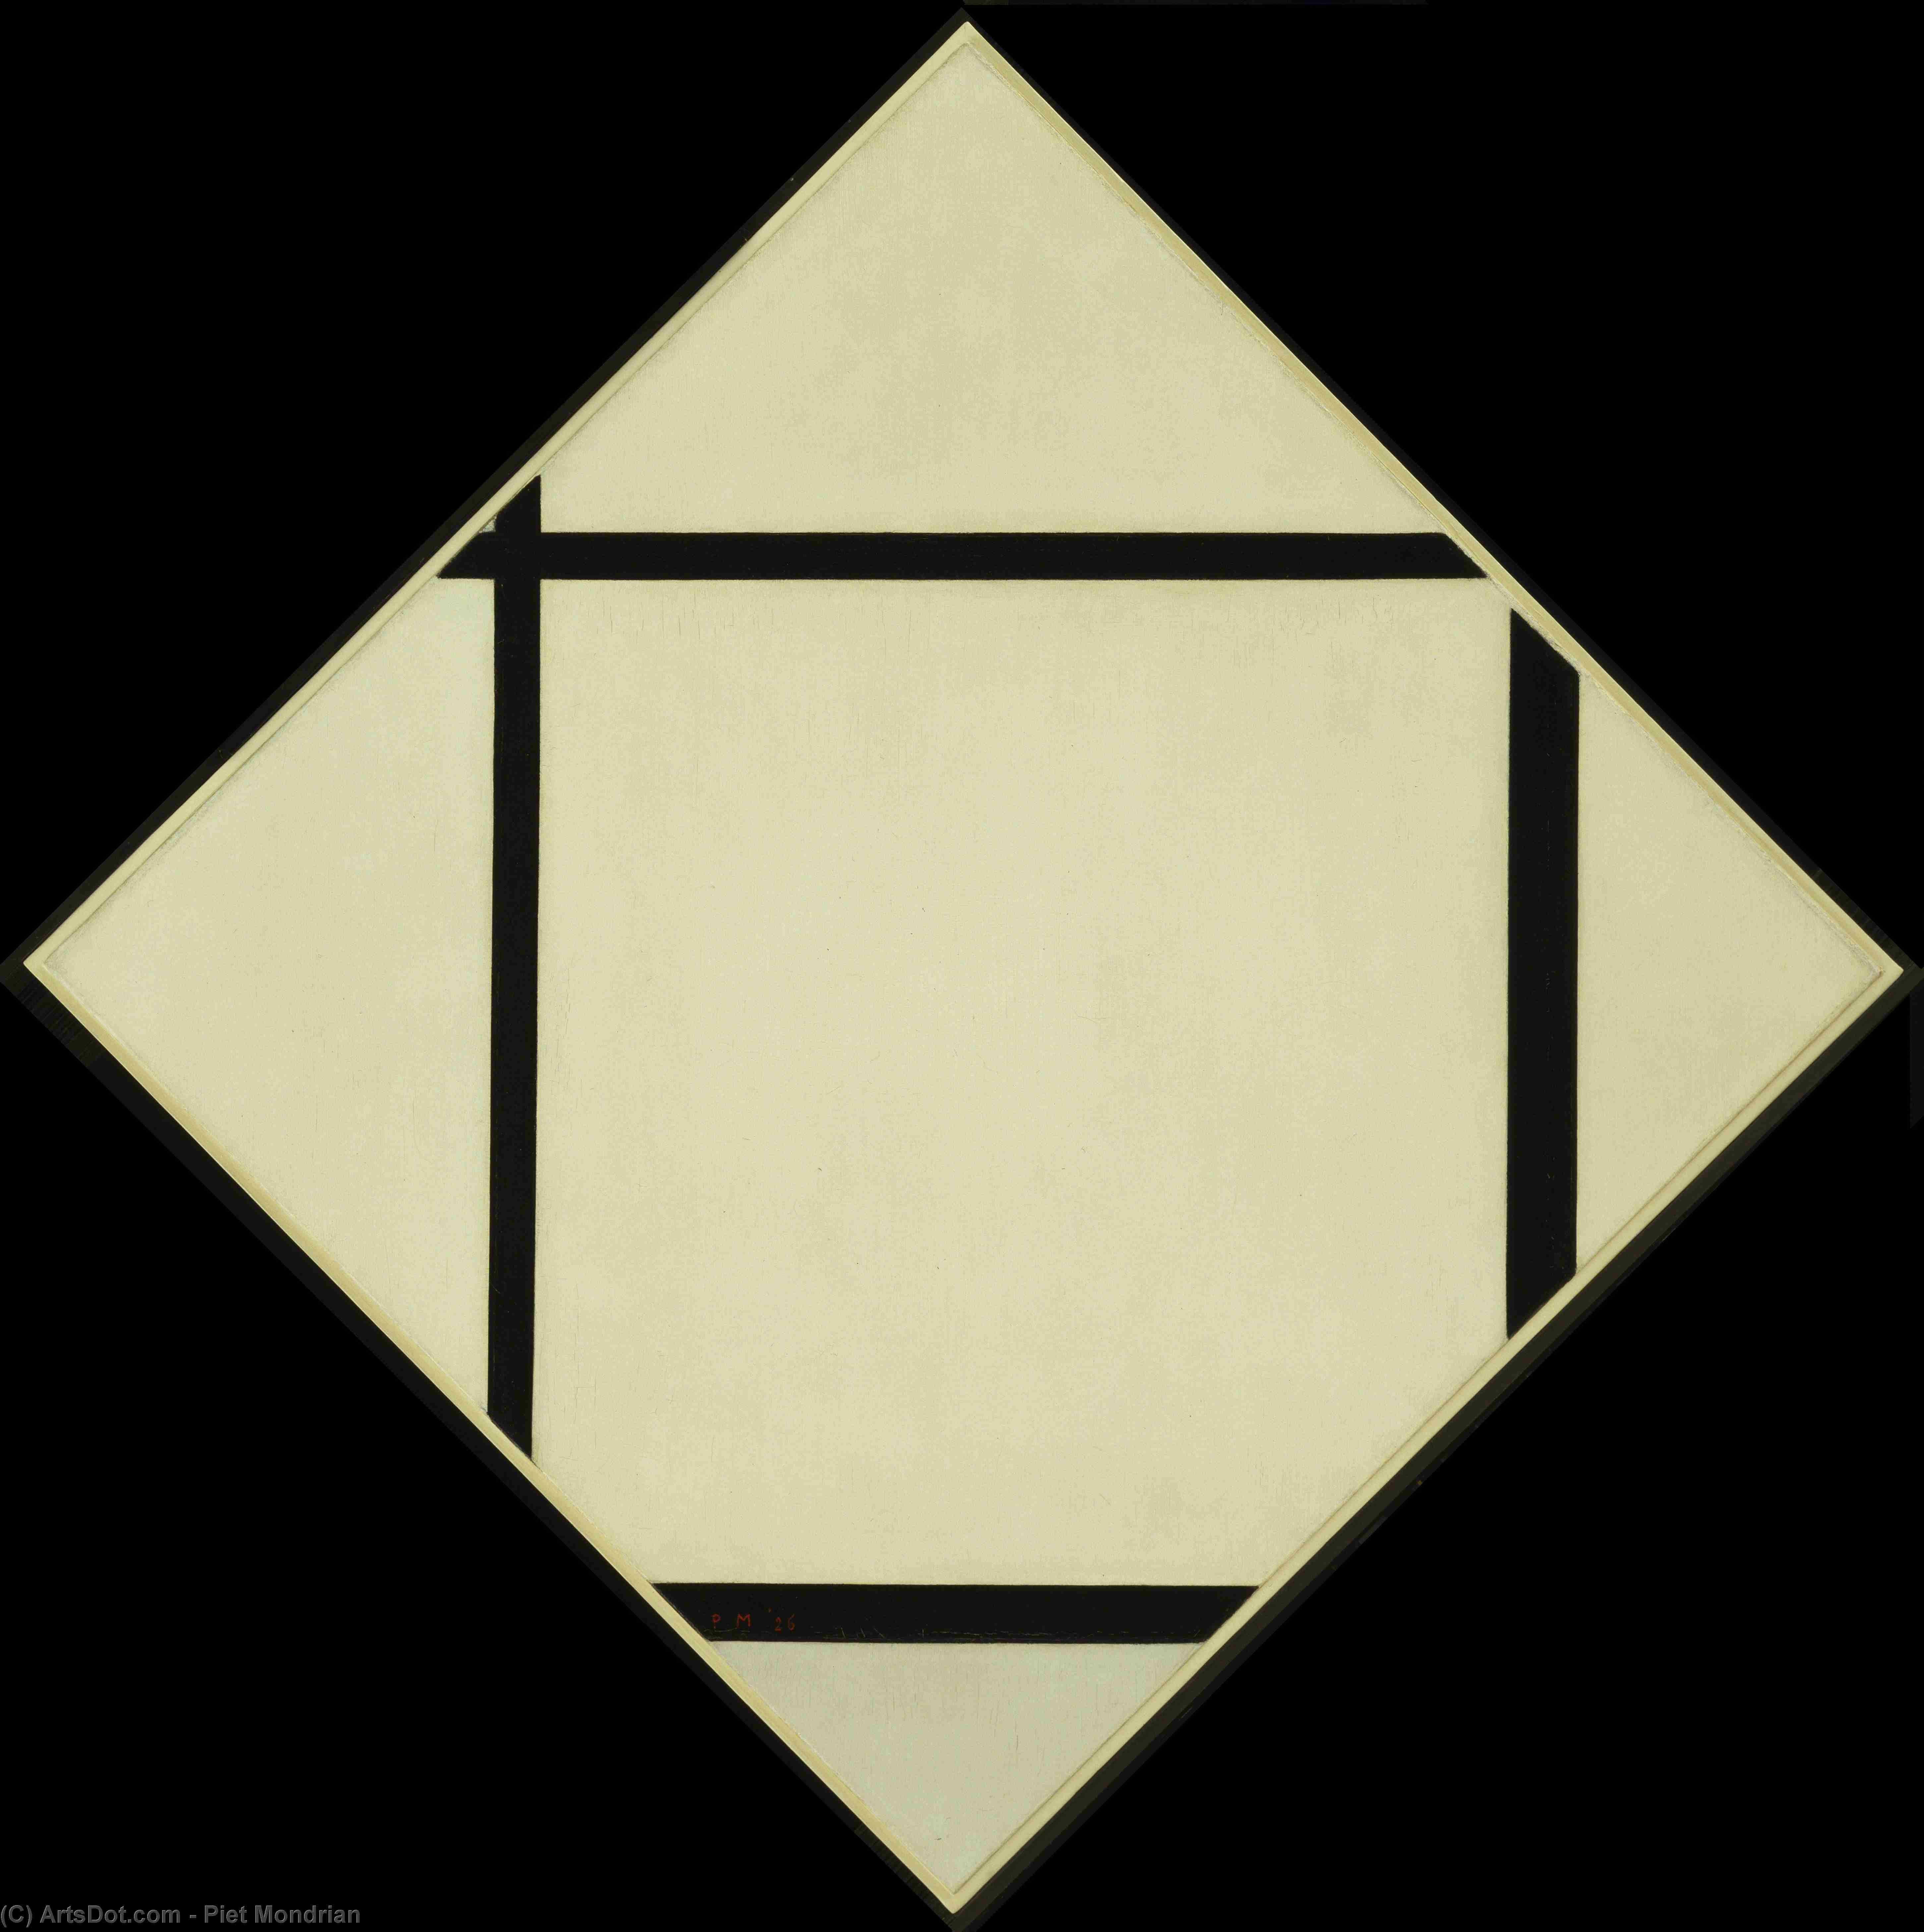  Museum Art Reproductions Tableau I Lozenge with Four Lines and Gray by Piet Mondrian (1872-1944, Netherlands) | ArtsDot.com